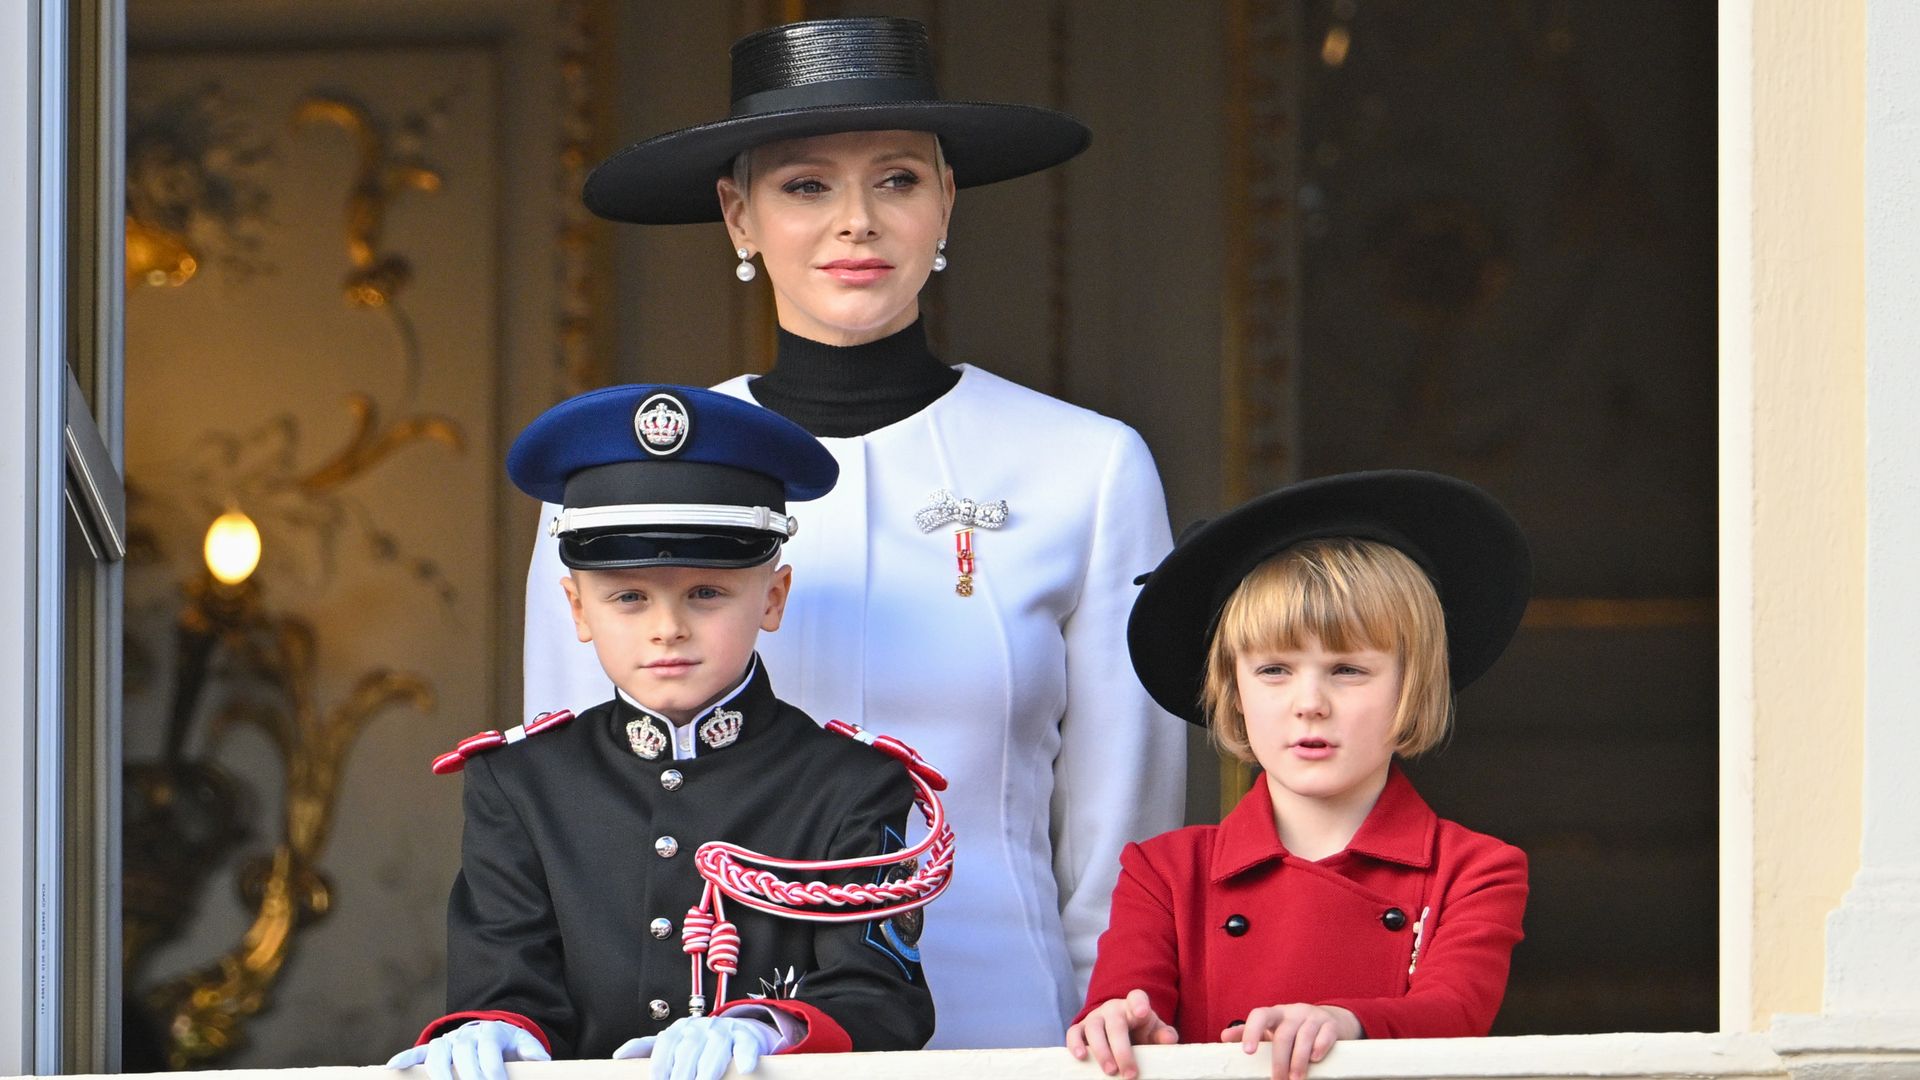 Princess Charlene of Monaco with his children Prince Jacques of Monaco and Princess Gabriella of Monaco appear at the Palace balcony during the Monaco National Day on November 19, 2022 in Monte-Carlo, Monaco